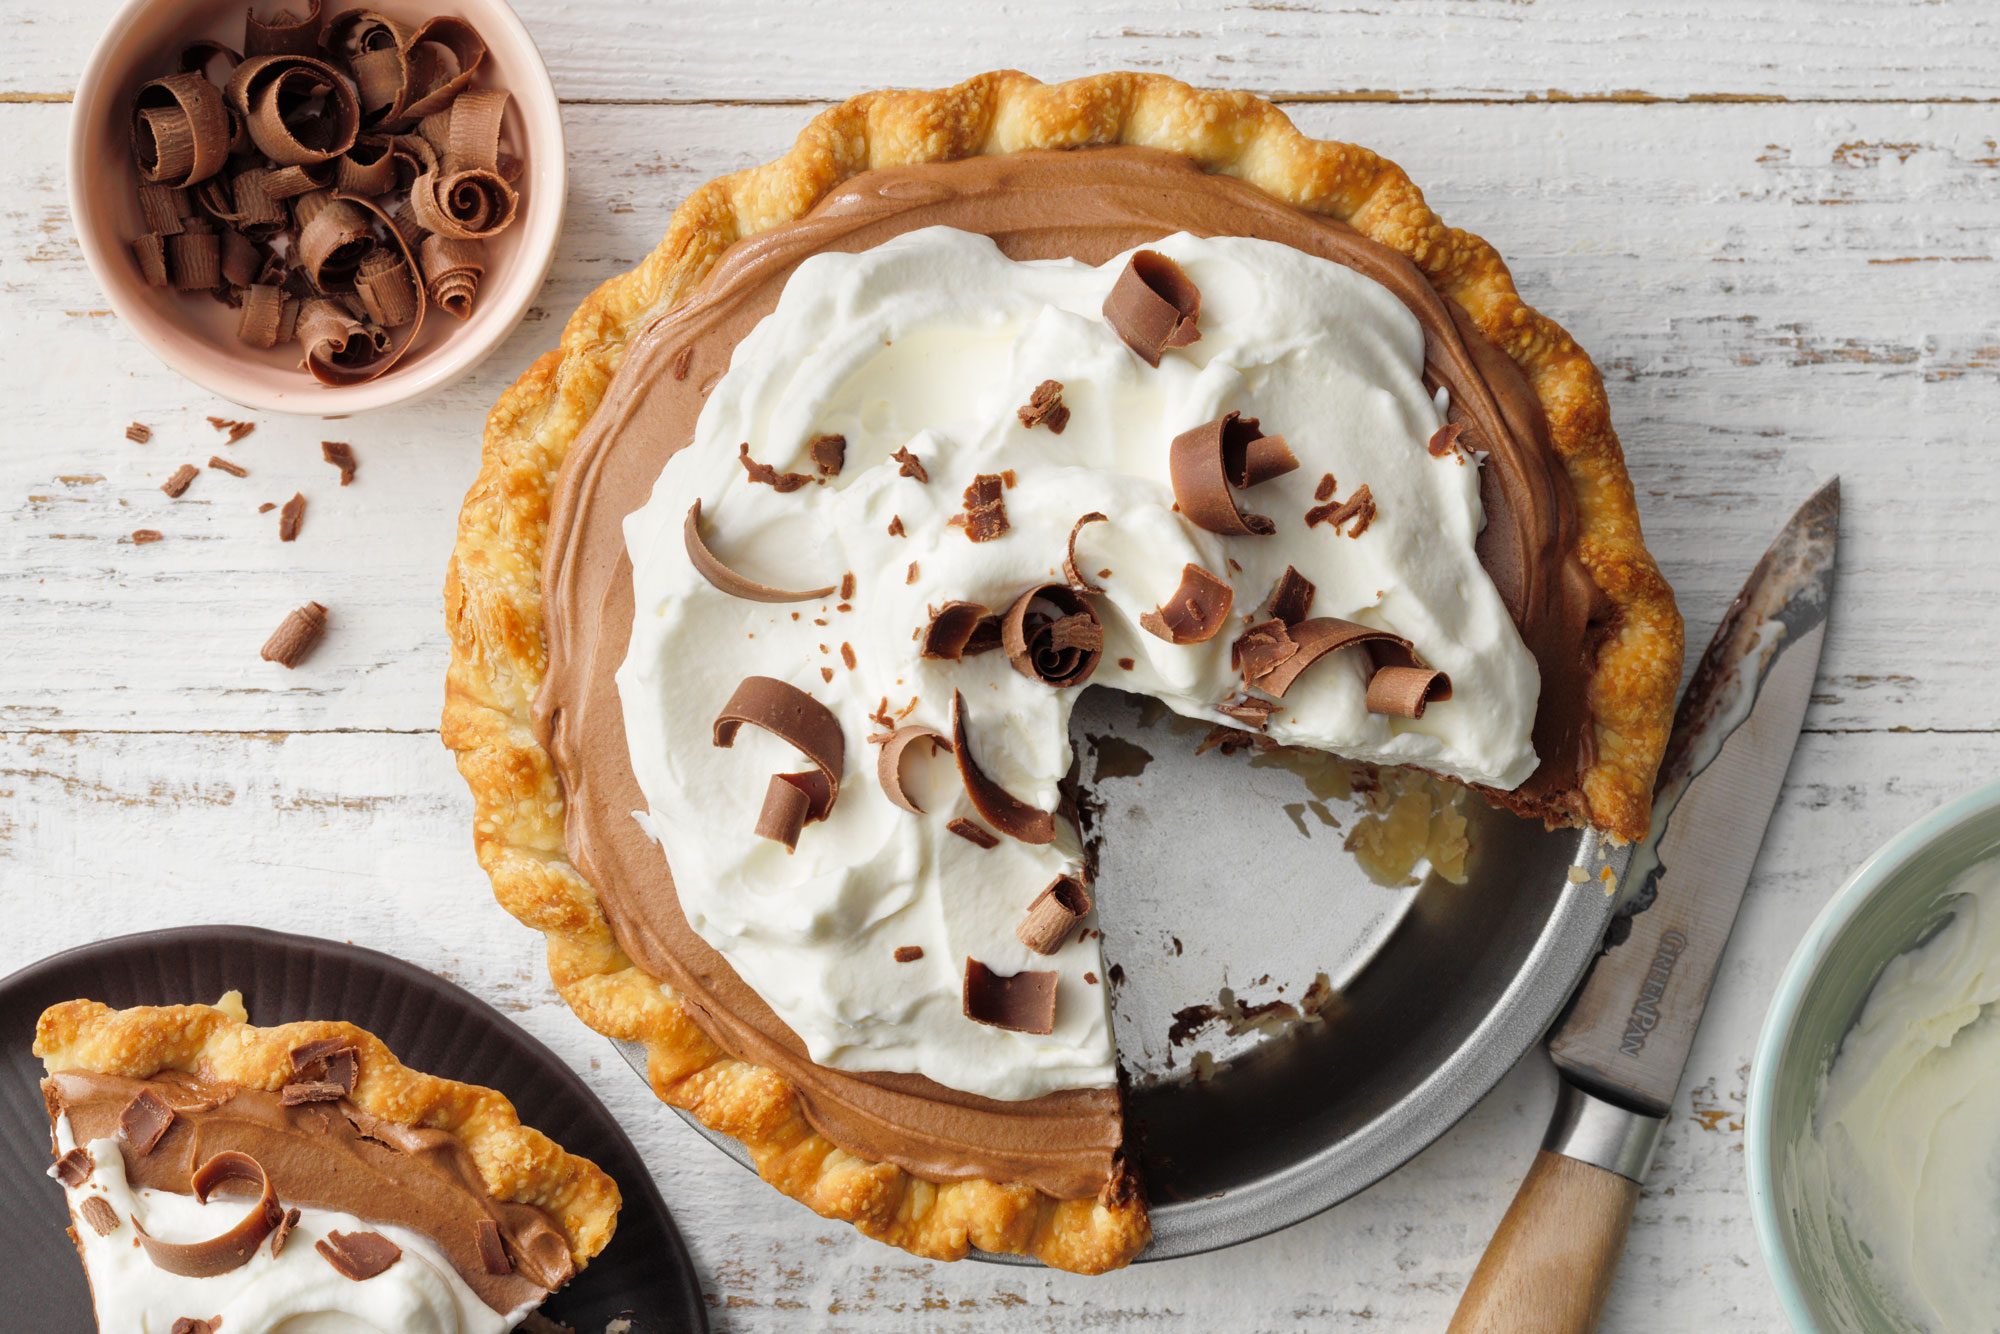 French Silk Pie in a steel pie plate on white painted wooden surface